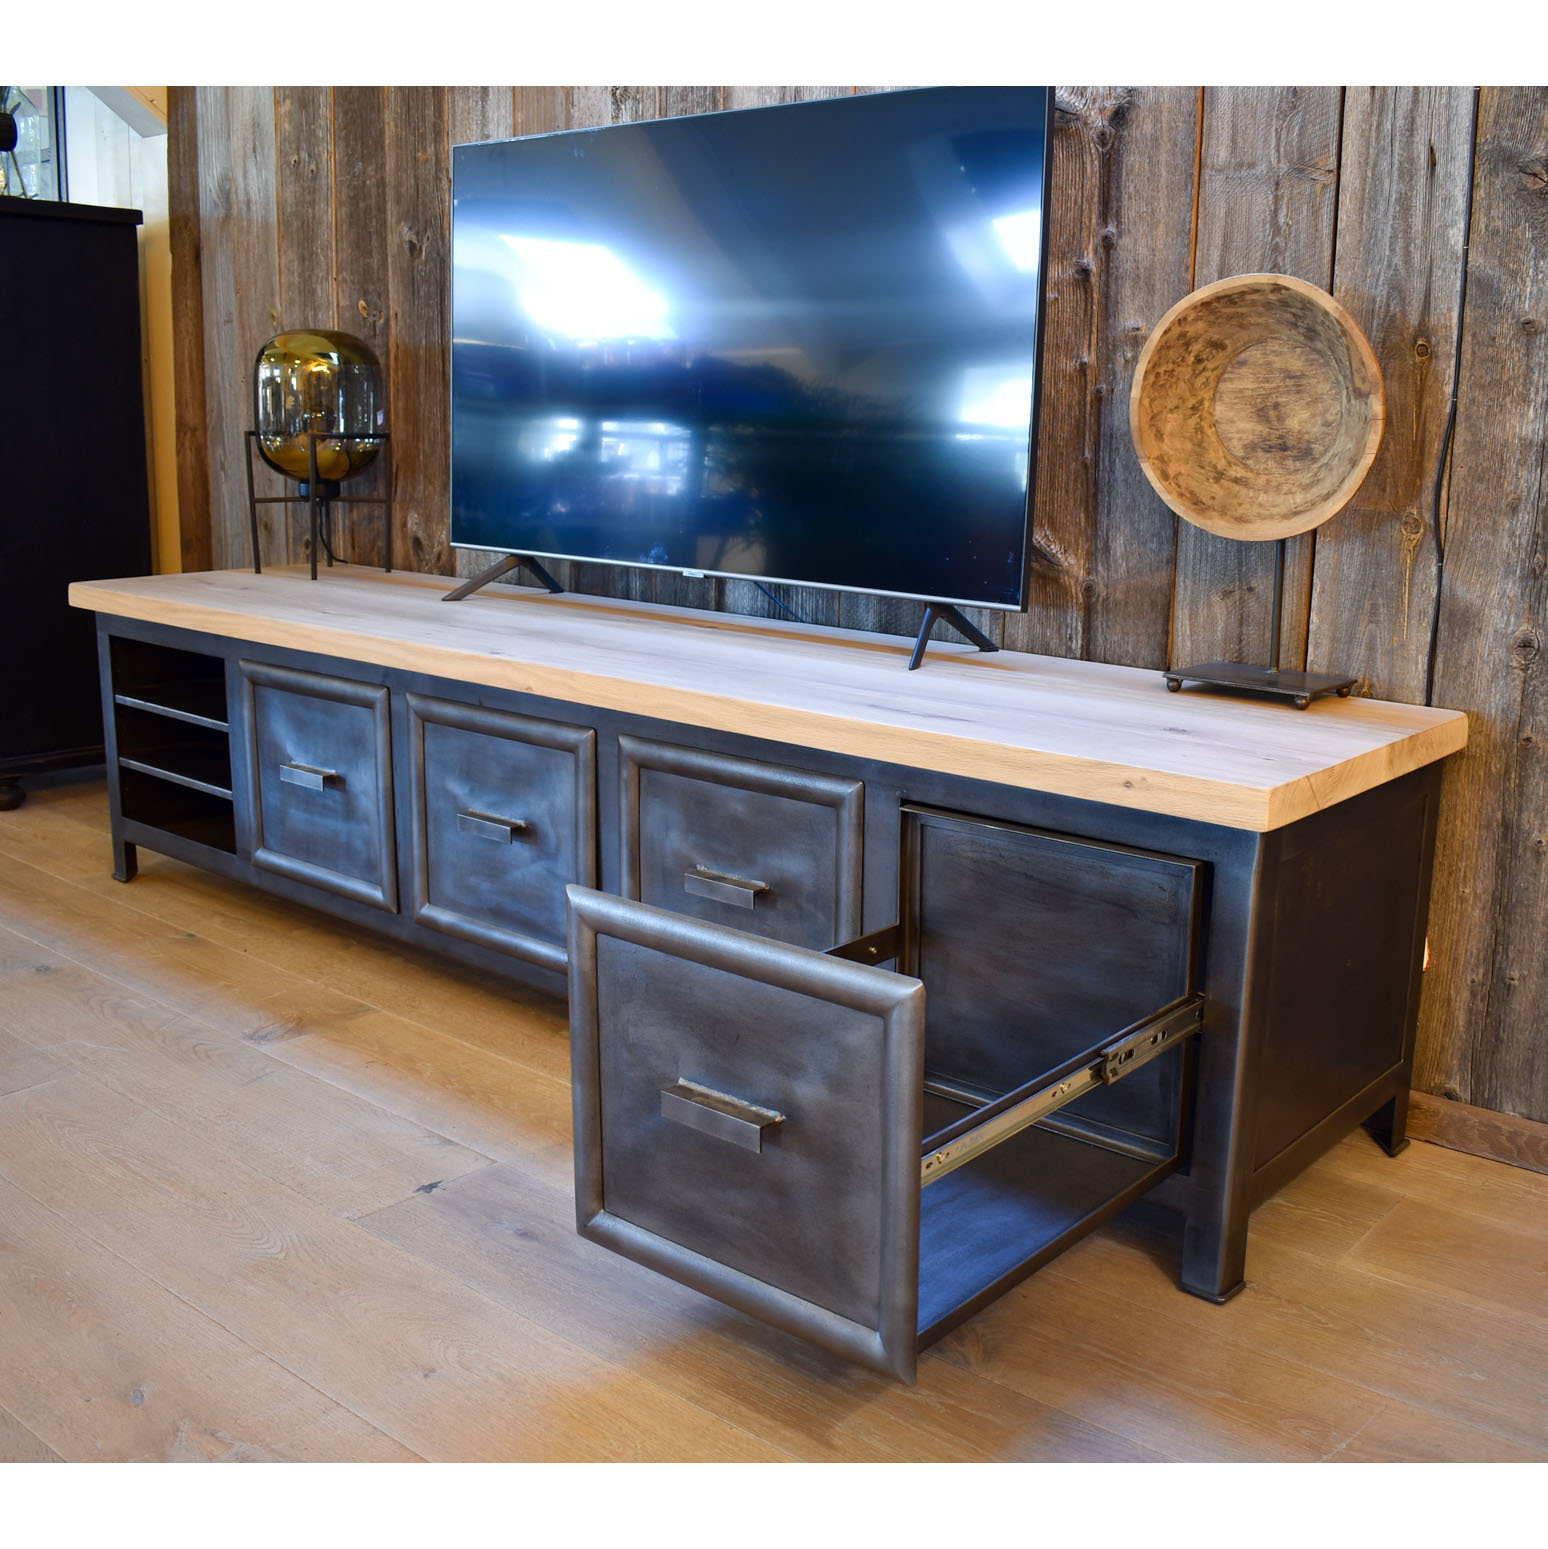 TV cabinet steel and wood